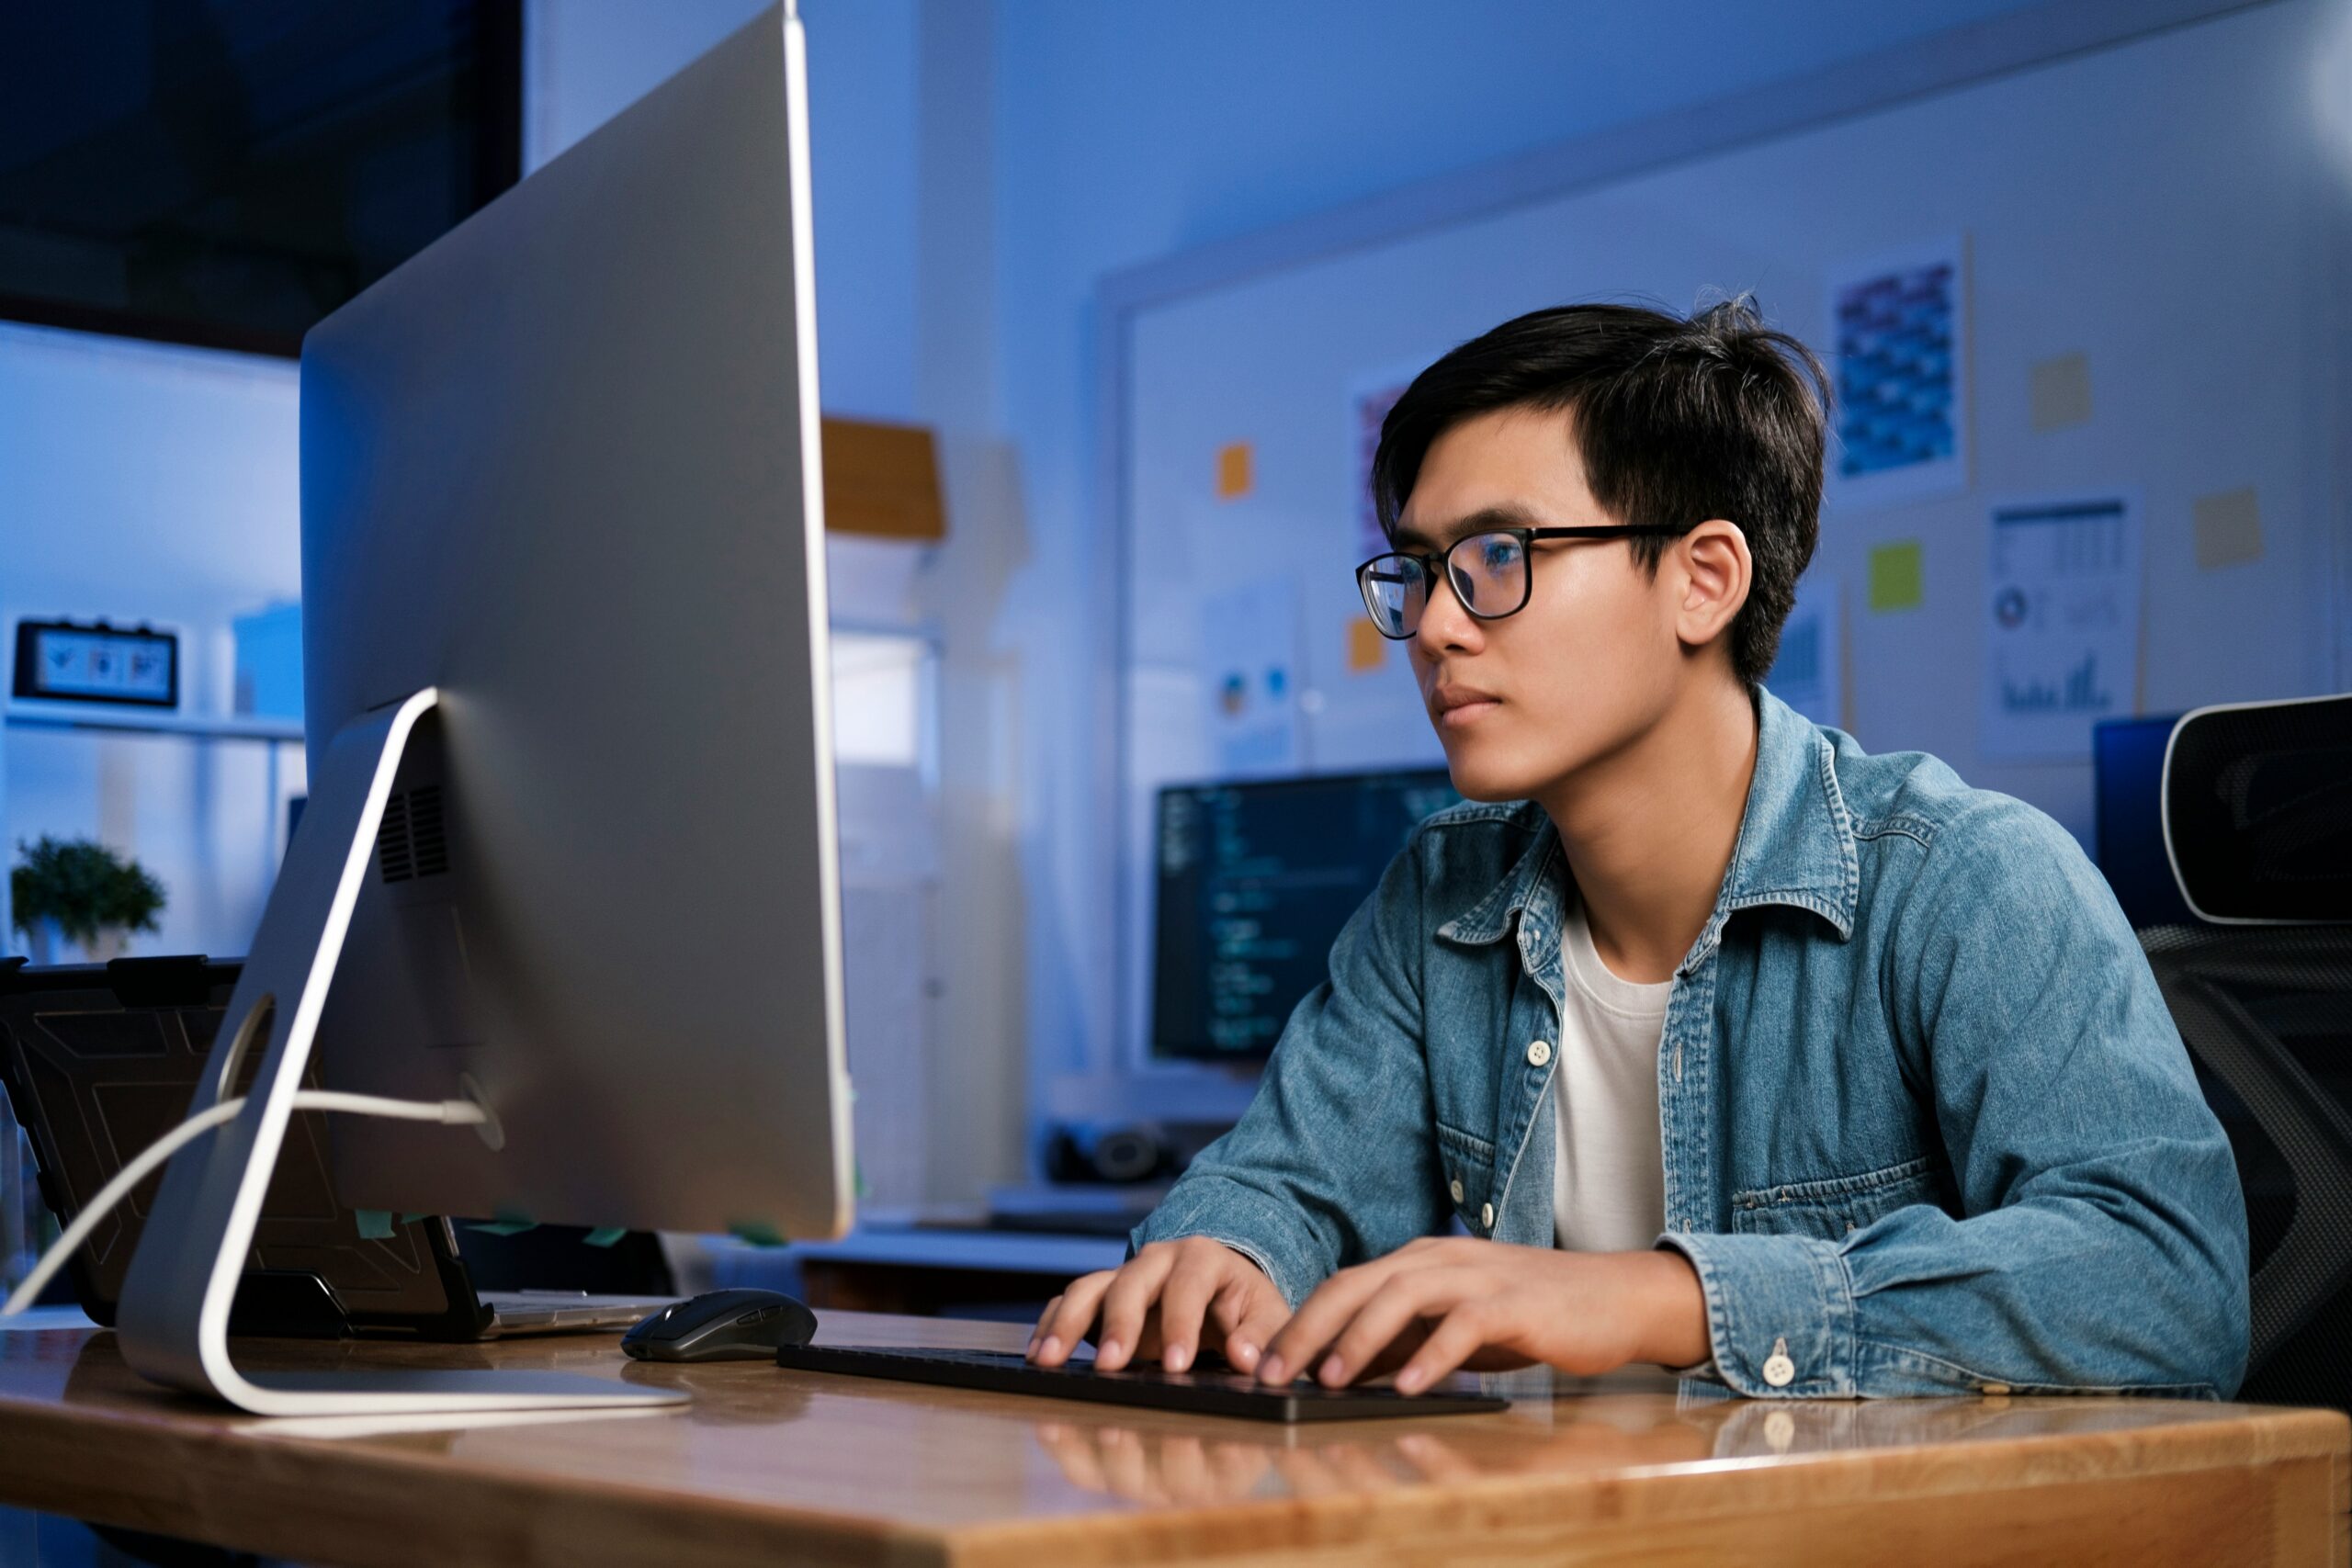 Young man concentrating on managed IT while working on a computer in a dimly lit office.